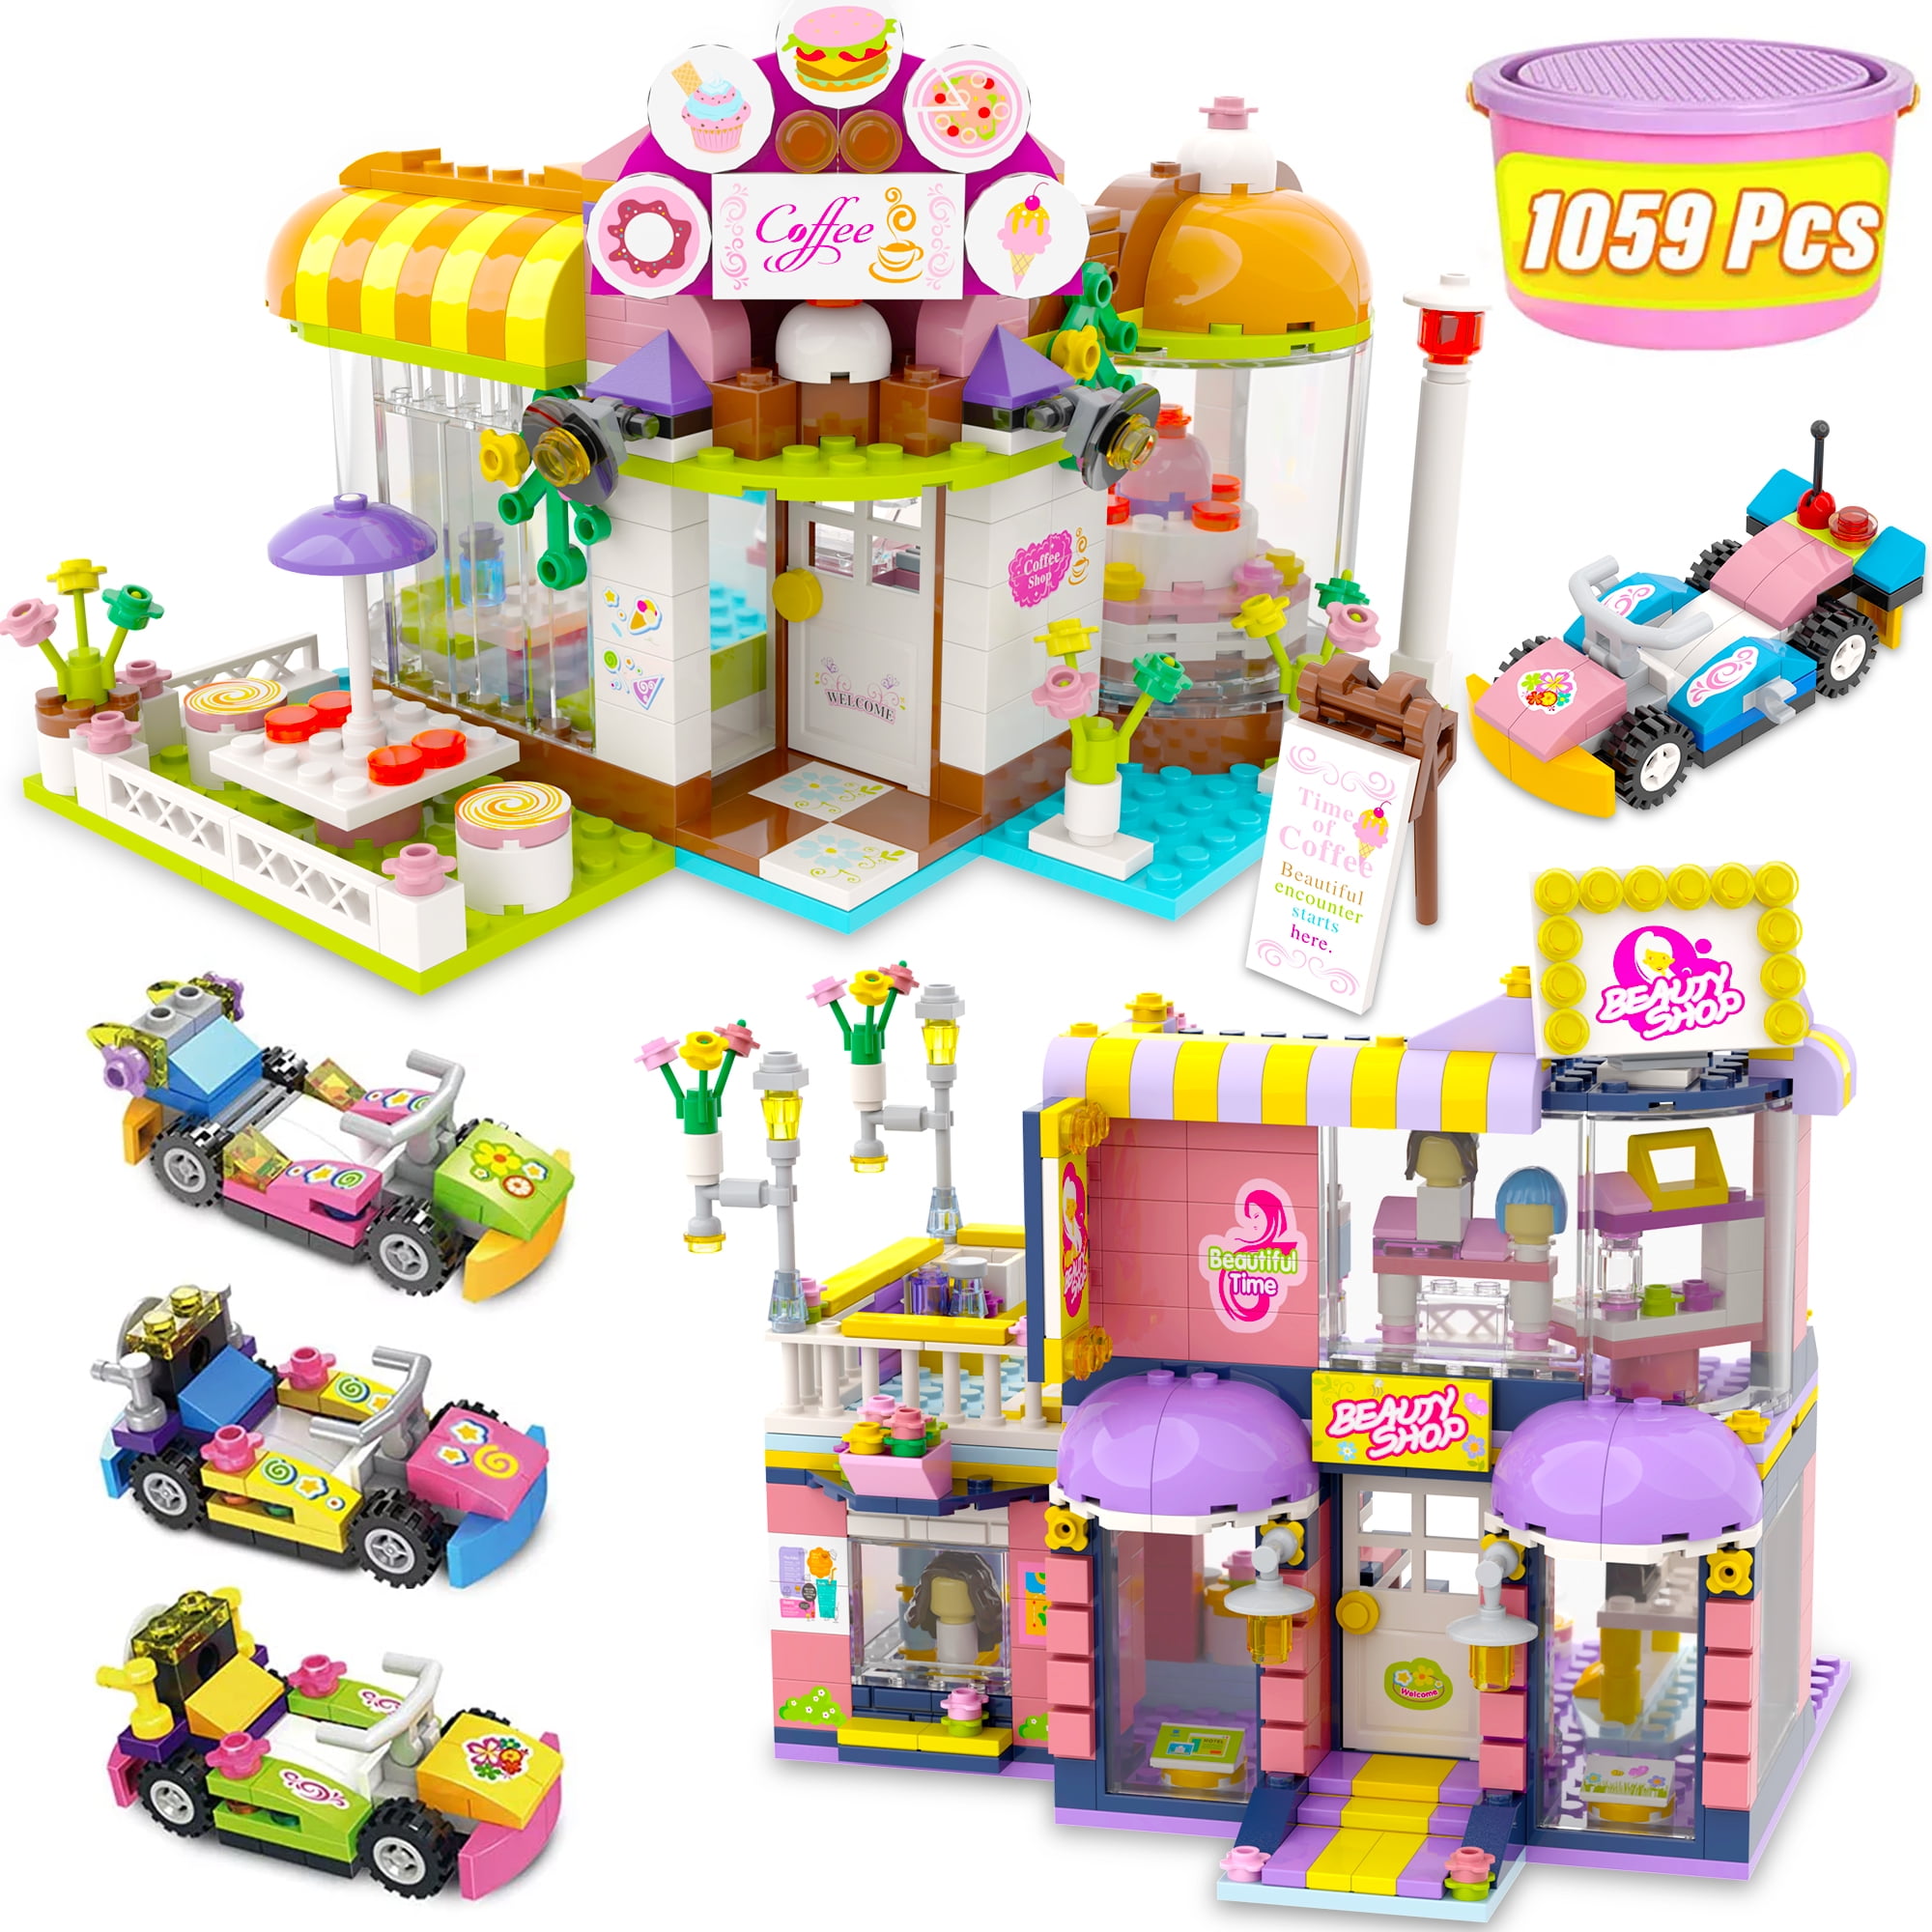 City Play Hair Salon Toy Building Kit Best Learning Roleplay Construction Toys Gift for Girls Boys Ages 6-12 1059 Pieces Creative STEM Building Toy Set for Kids Friends Café Building Blocks 